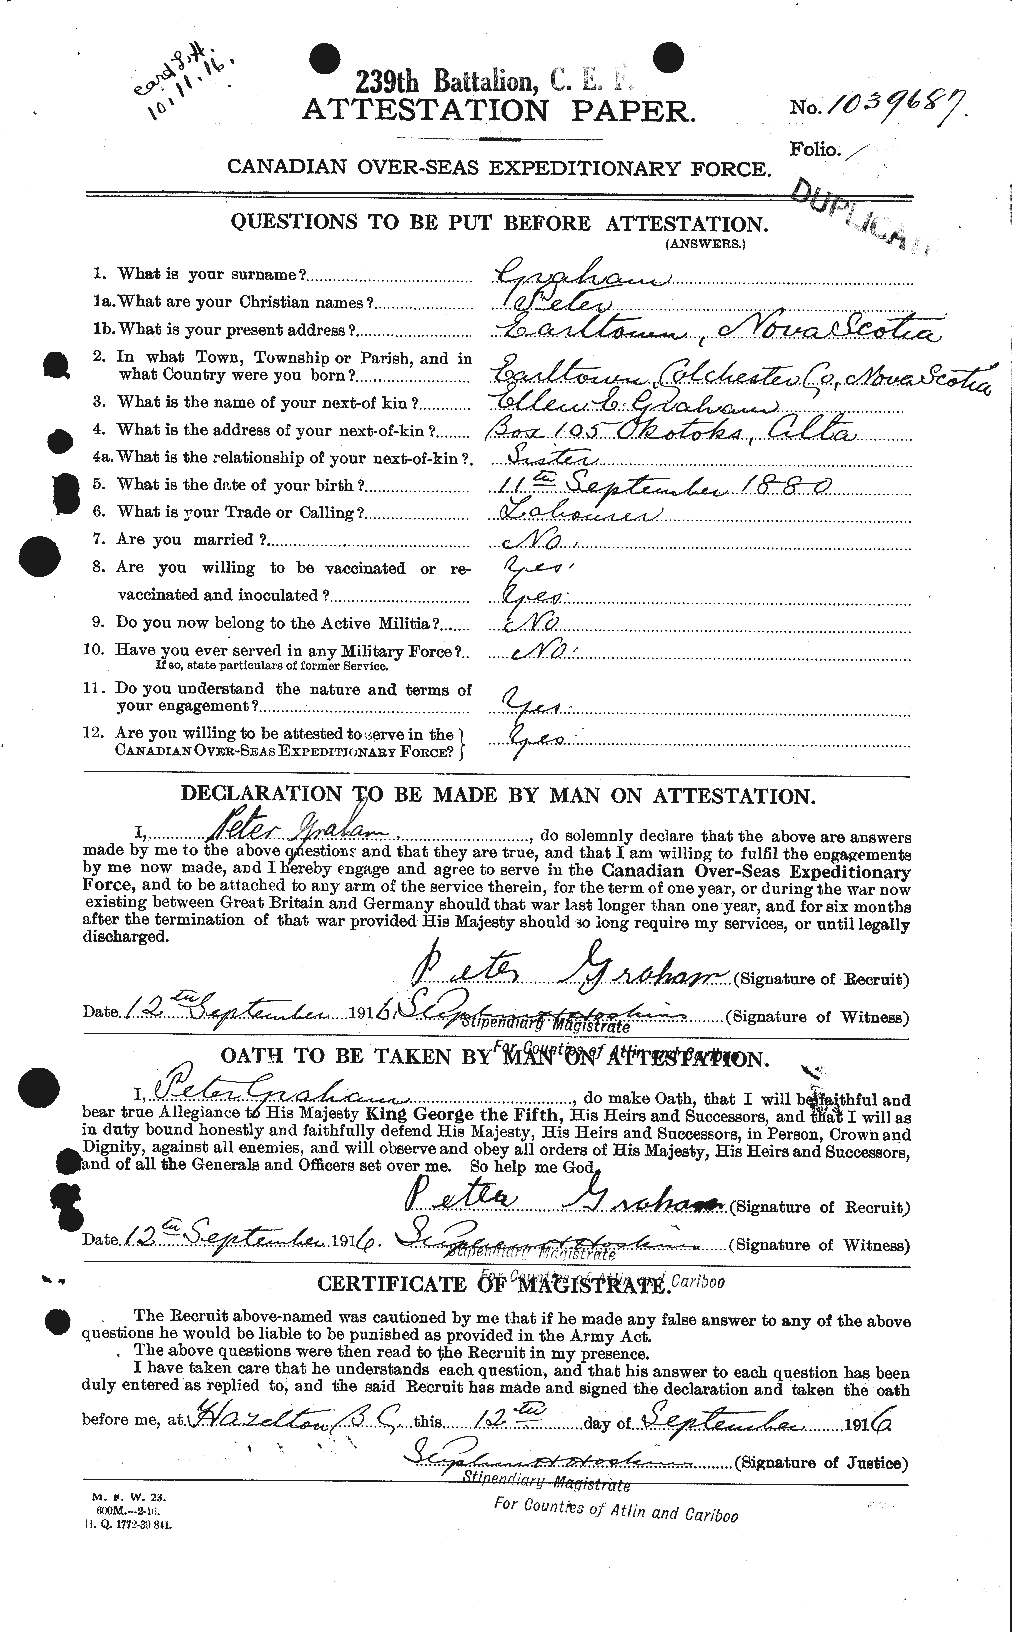 Personnel Records of the First World War - CEF 359345a